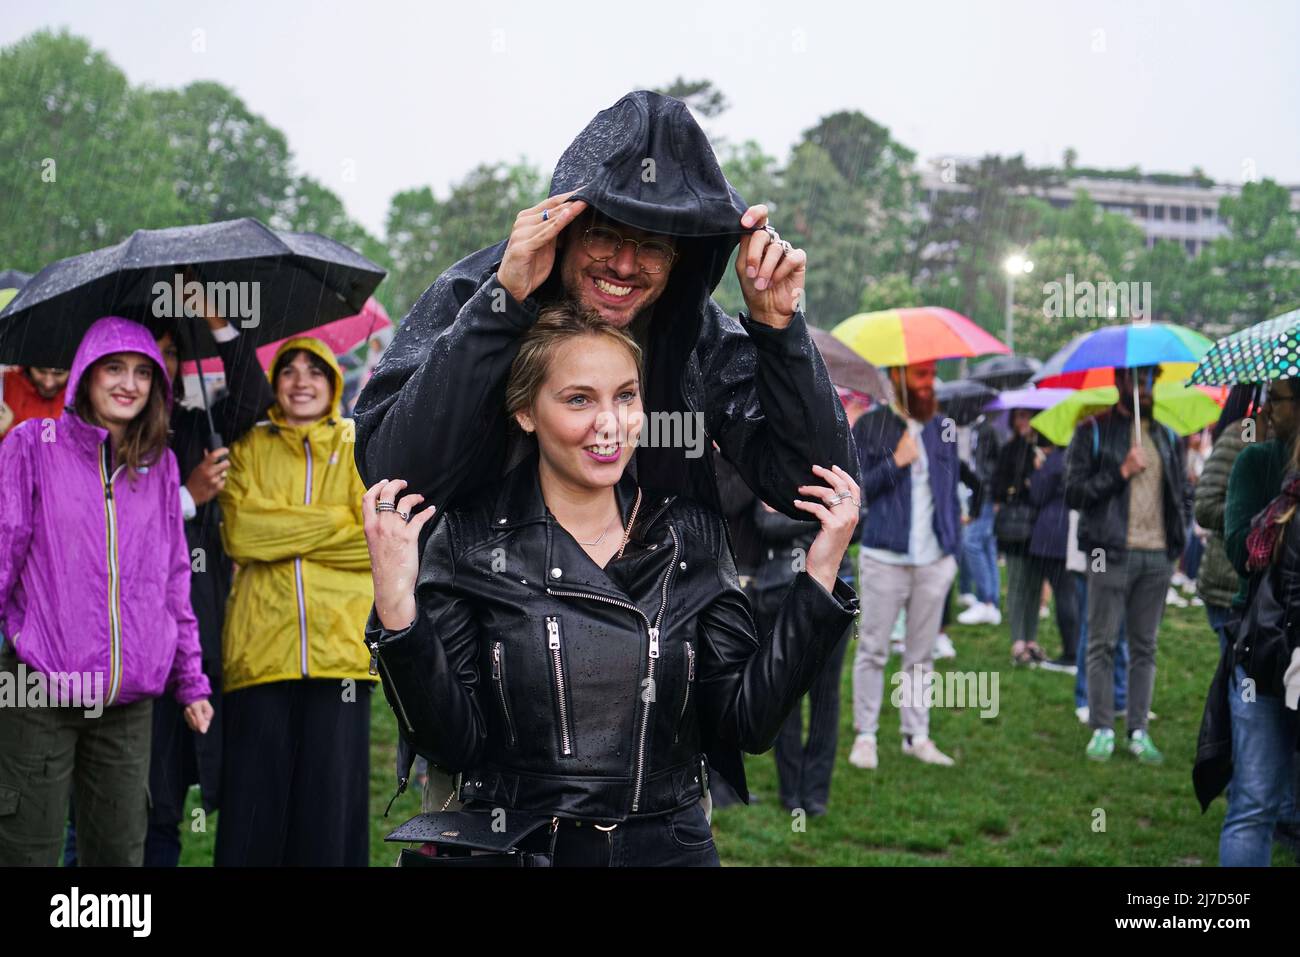 People at an outdoor event take cover from the rain with umbrellas. Turin, Italy - May 2022 Stock Photo